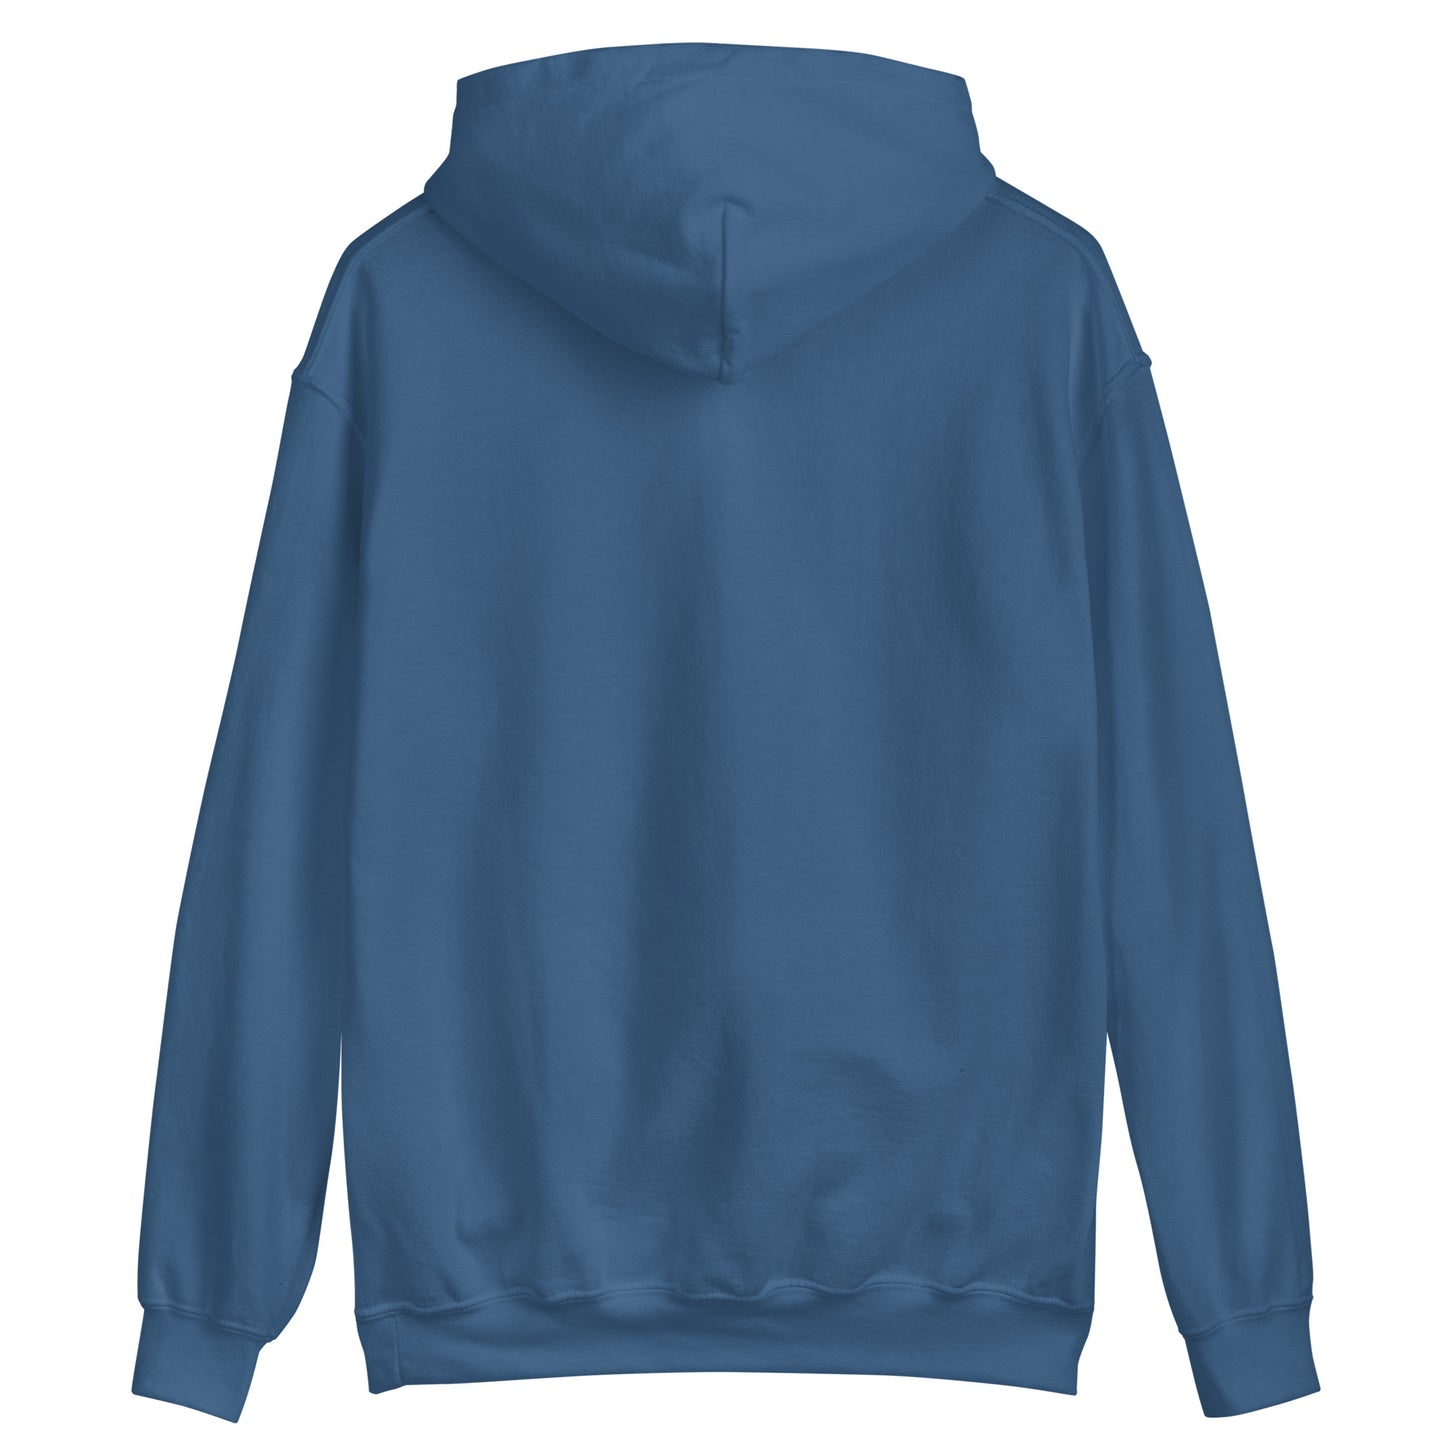 Emotionally Attached Hoodie